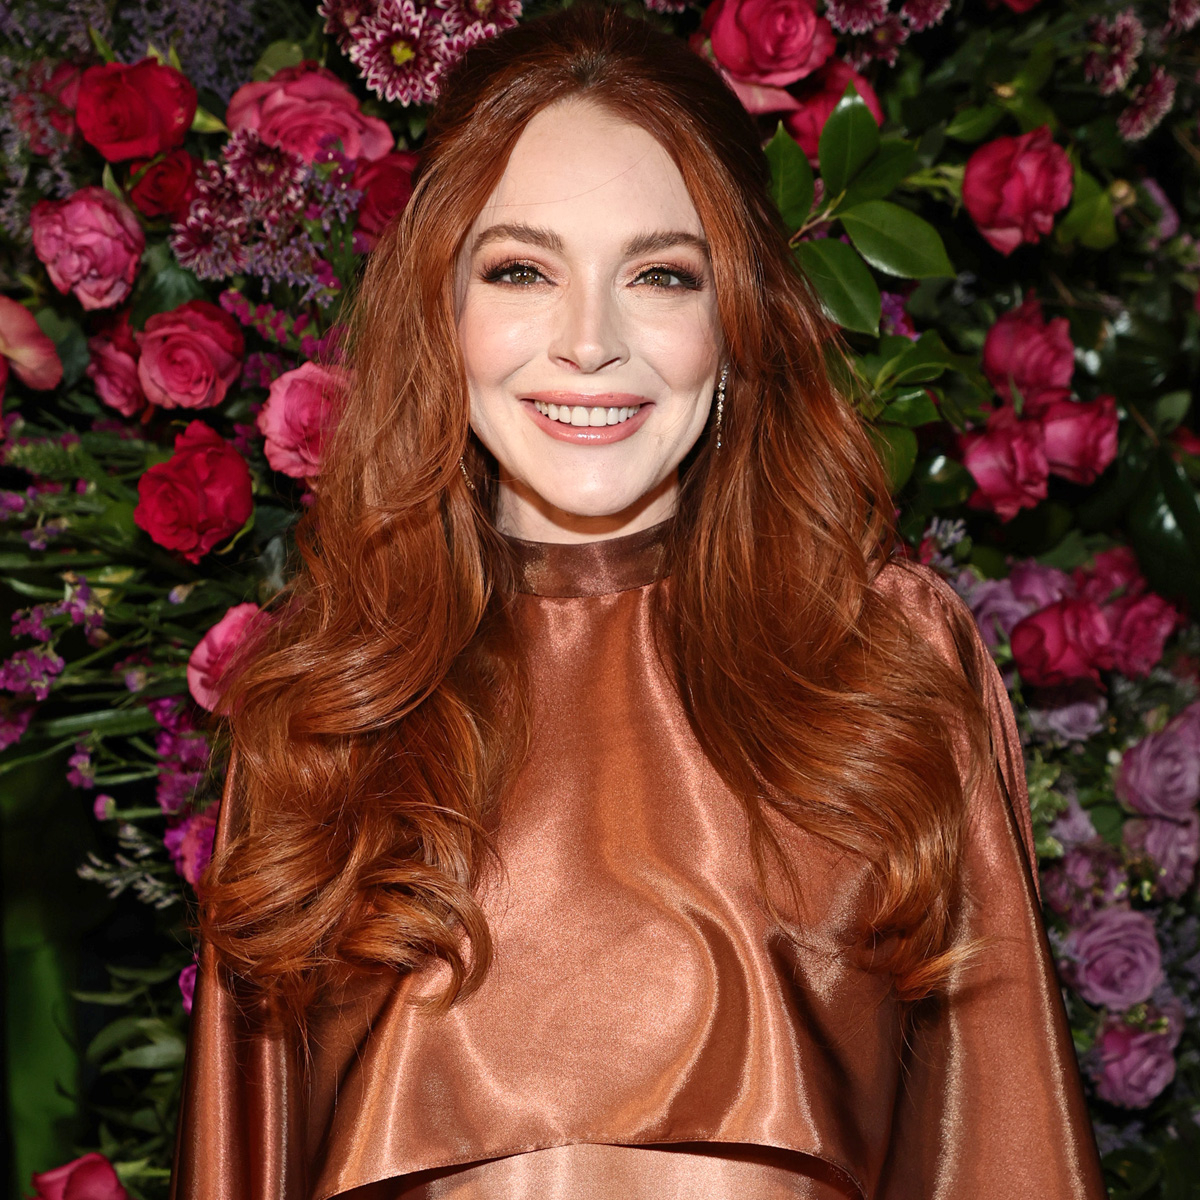 Why Lindsay Lohan’s Advice to New Moms Will Be Their Biggest Challenge